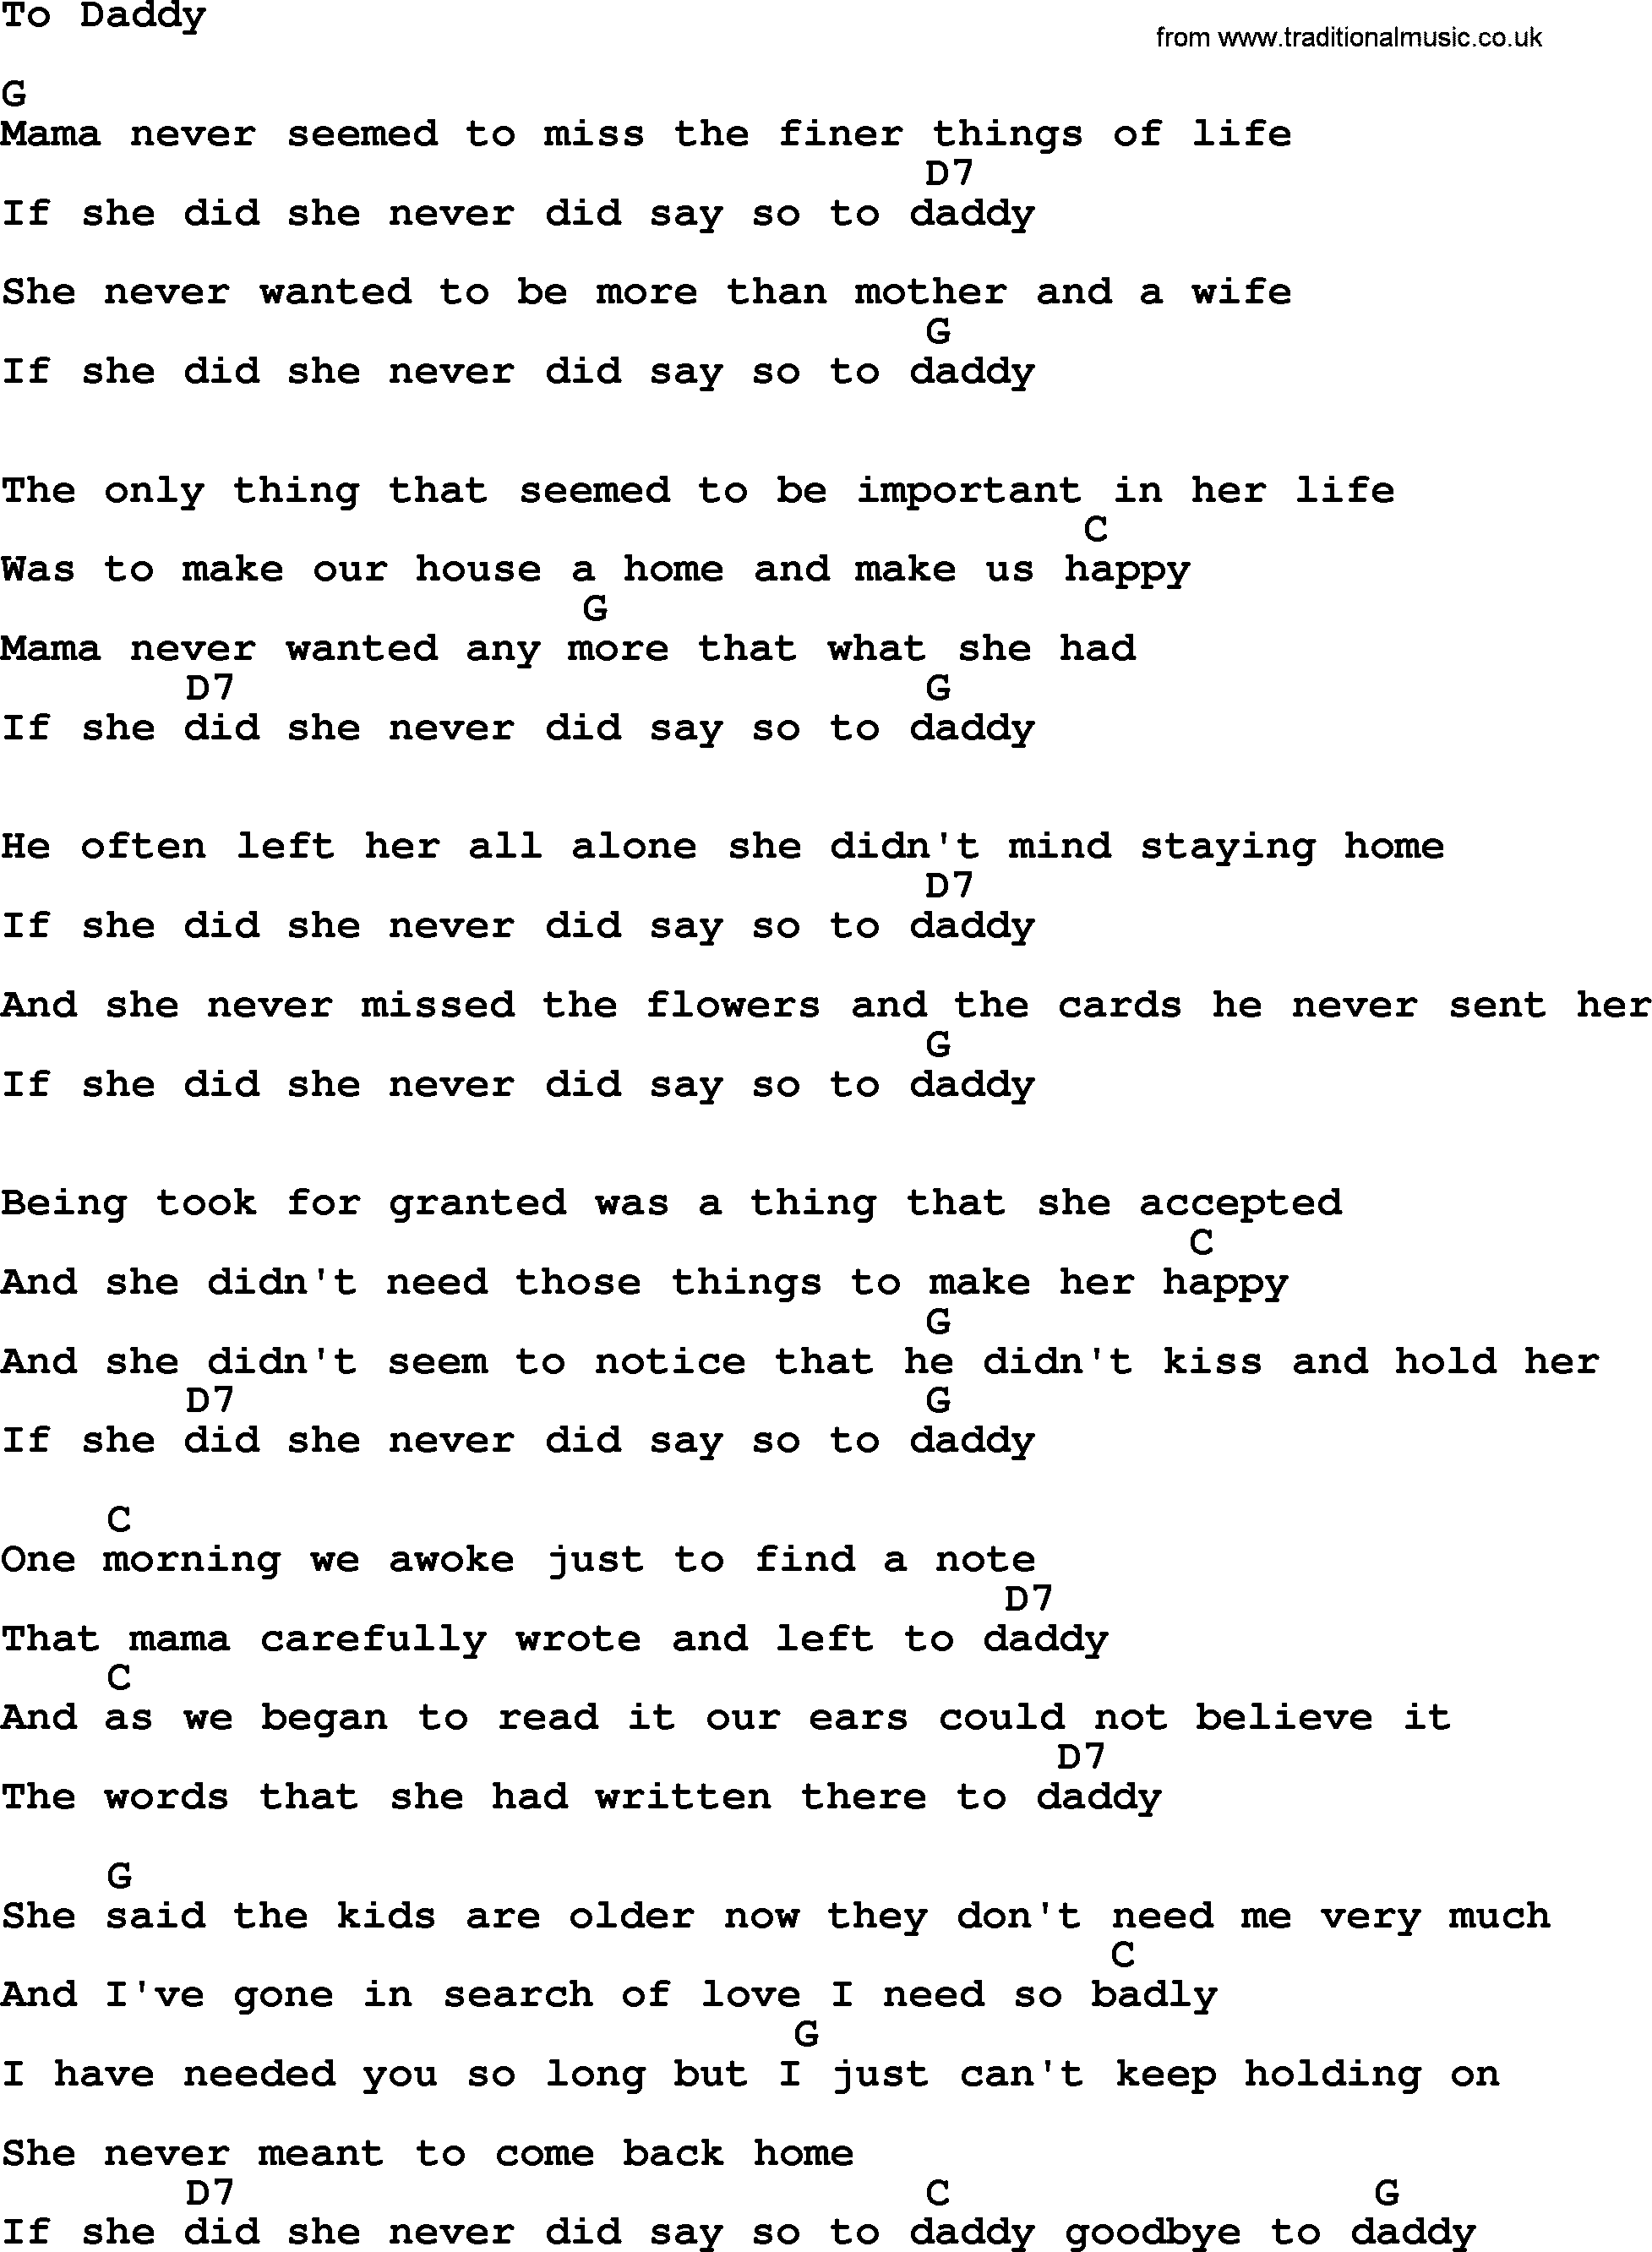 Dolly Parton song To Daddy, lyrics and chords